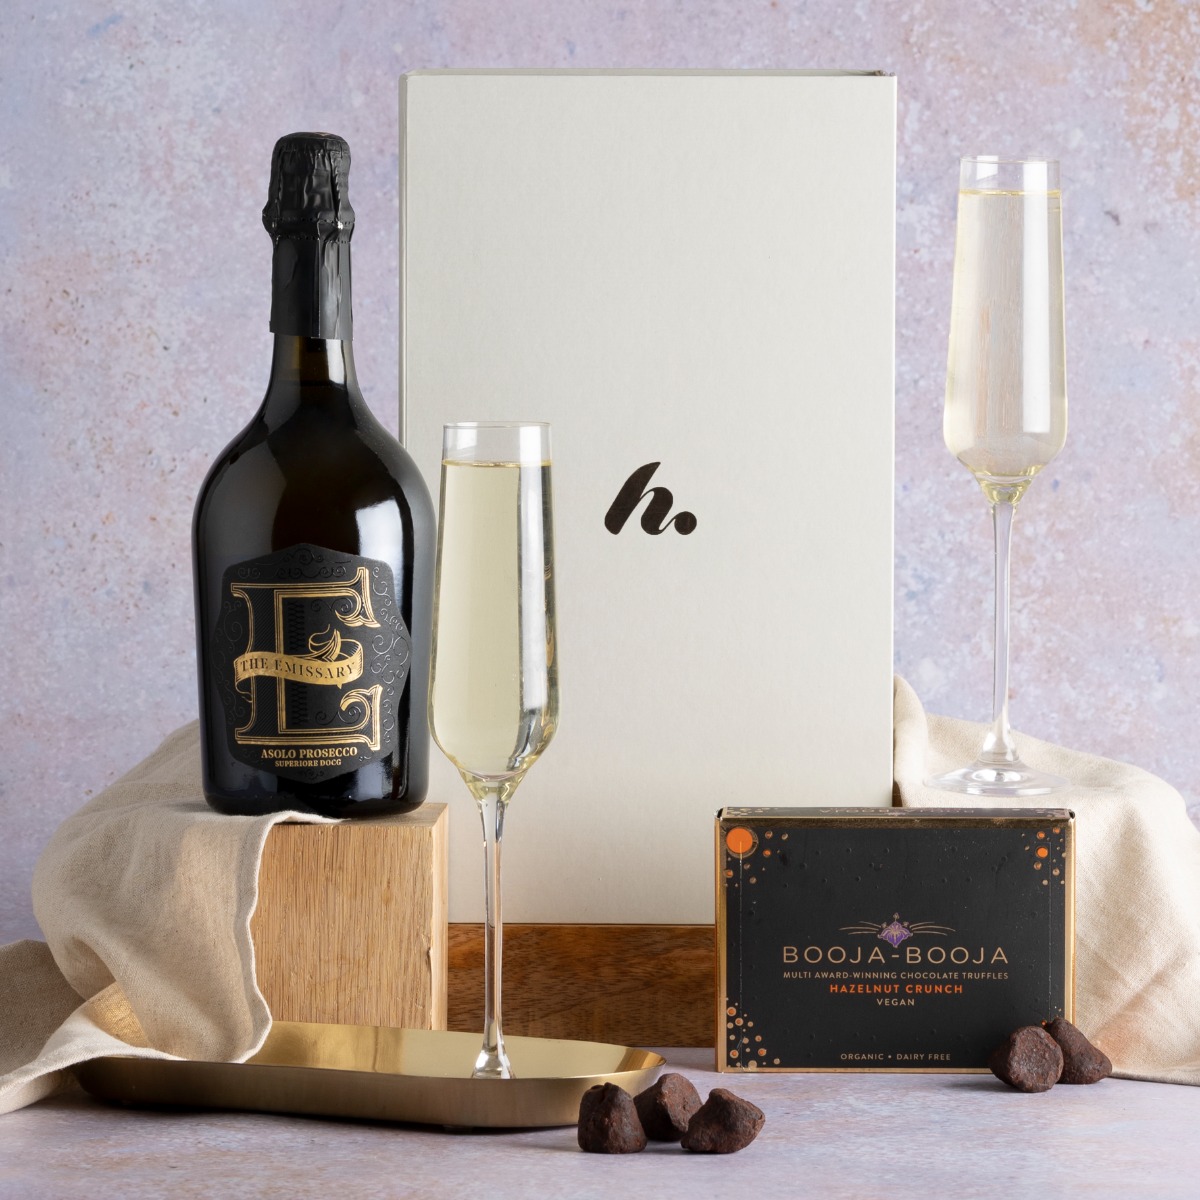 Luxury Prosecco & Truffles Gift with contents on display